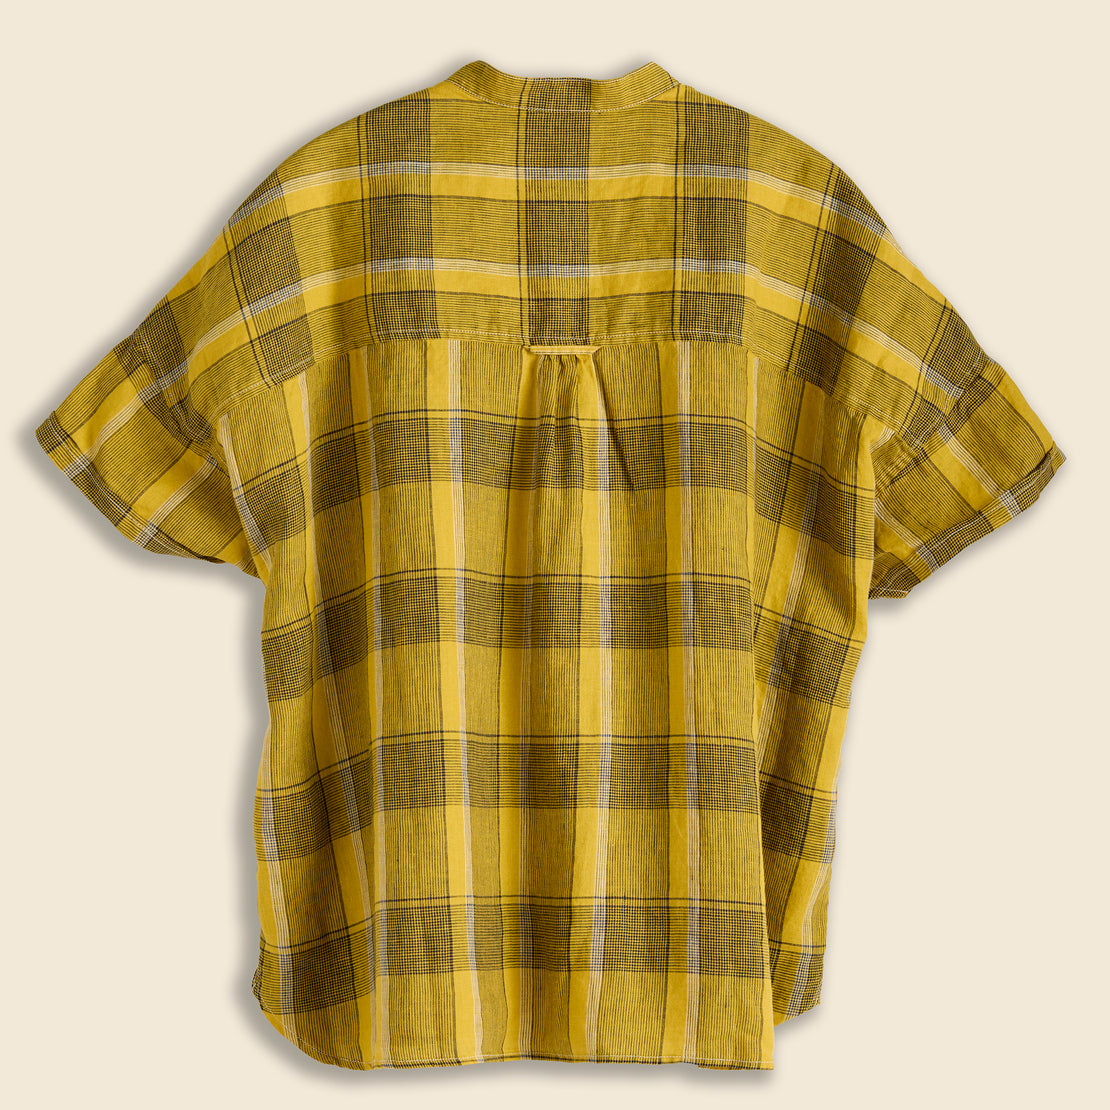 Oversized Linen Check S/S Shirt - Yellow - BEAMS BOY - STAG Provisions - W - Tops - S/S Woven